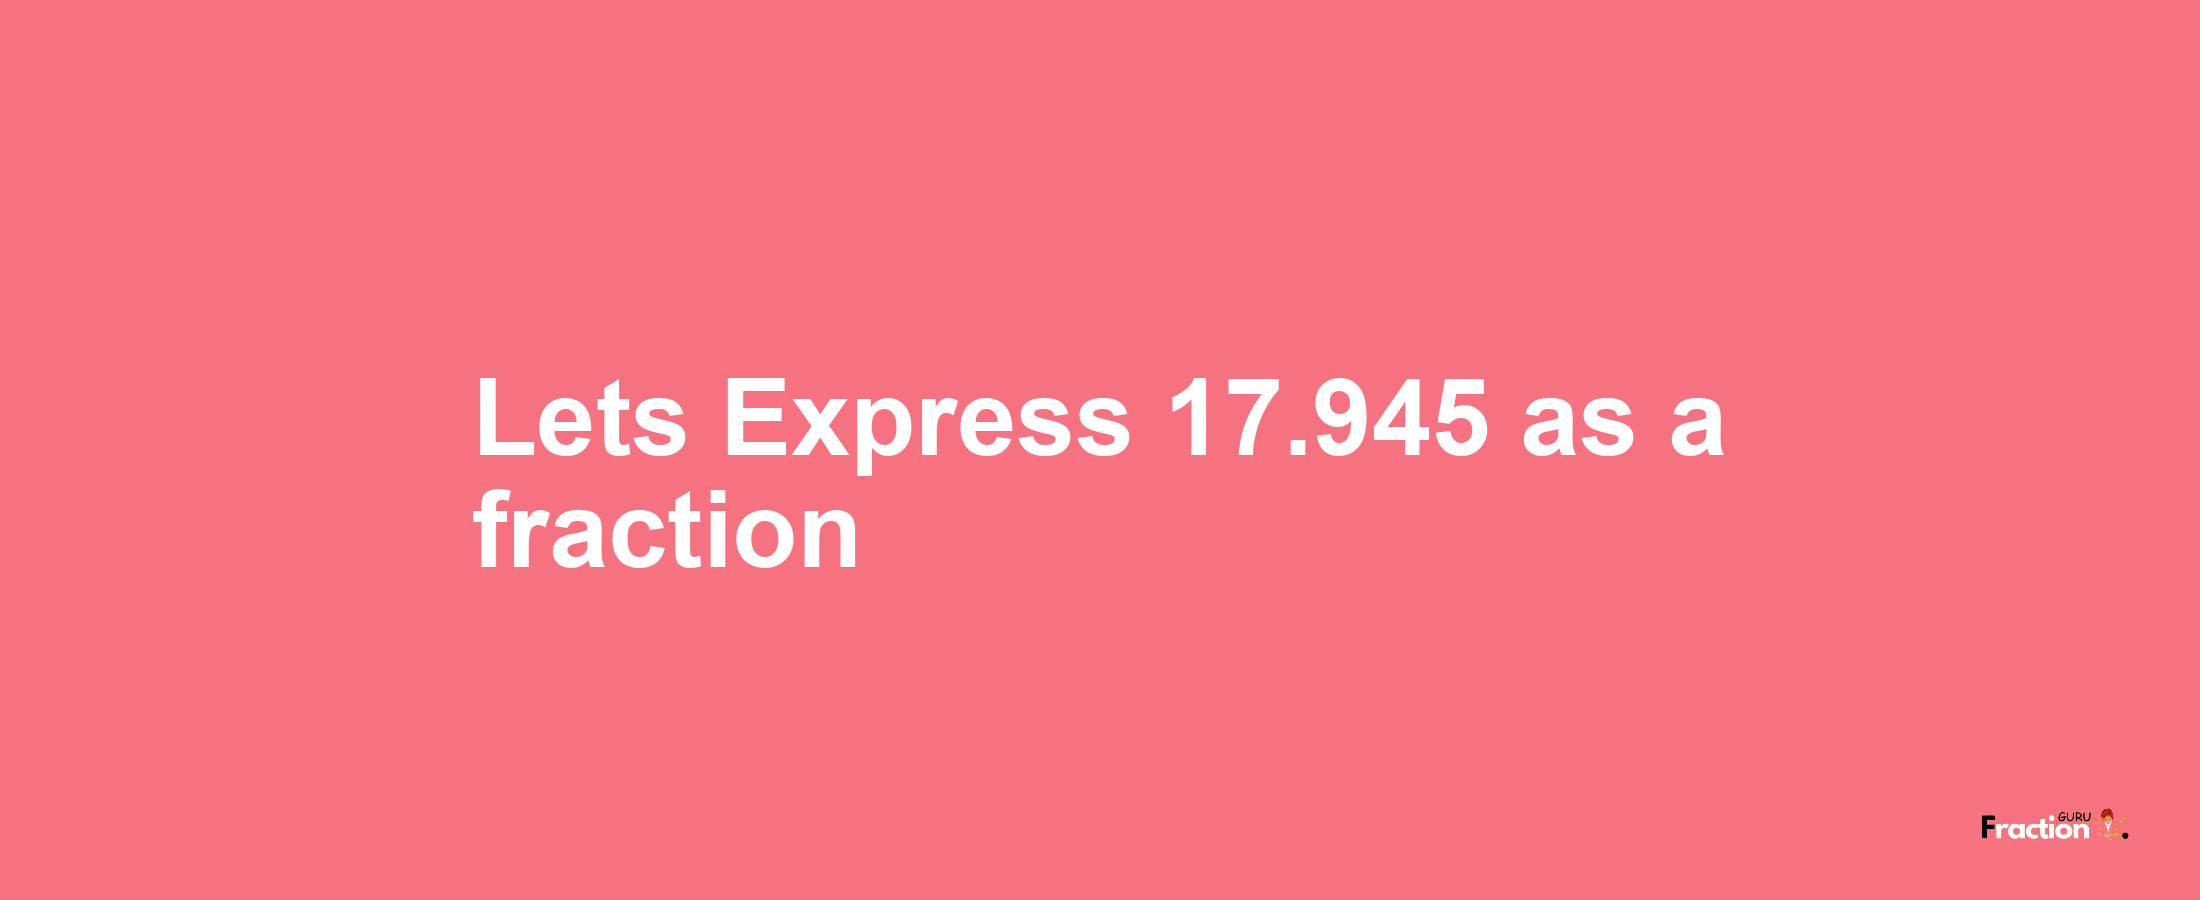 Lets Express 17.945 as afraction